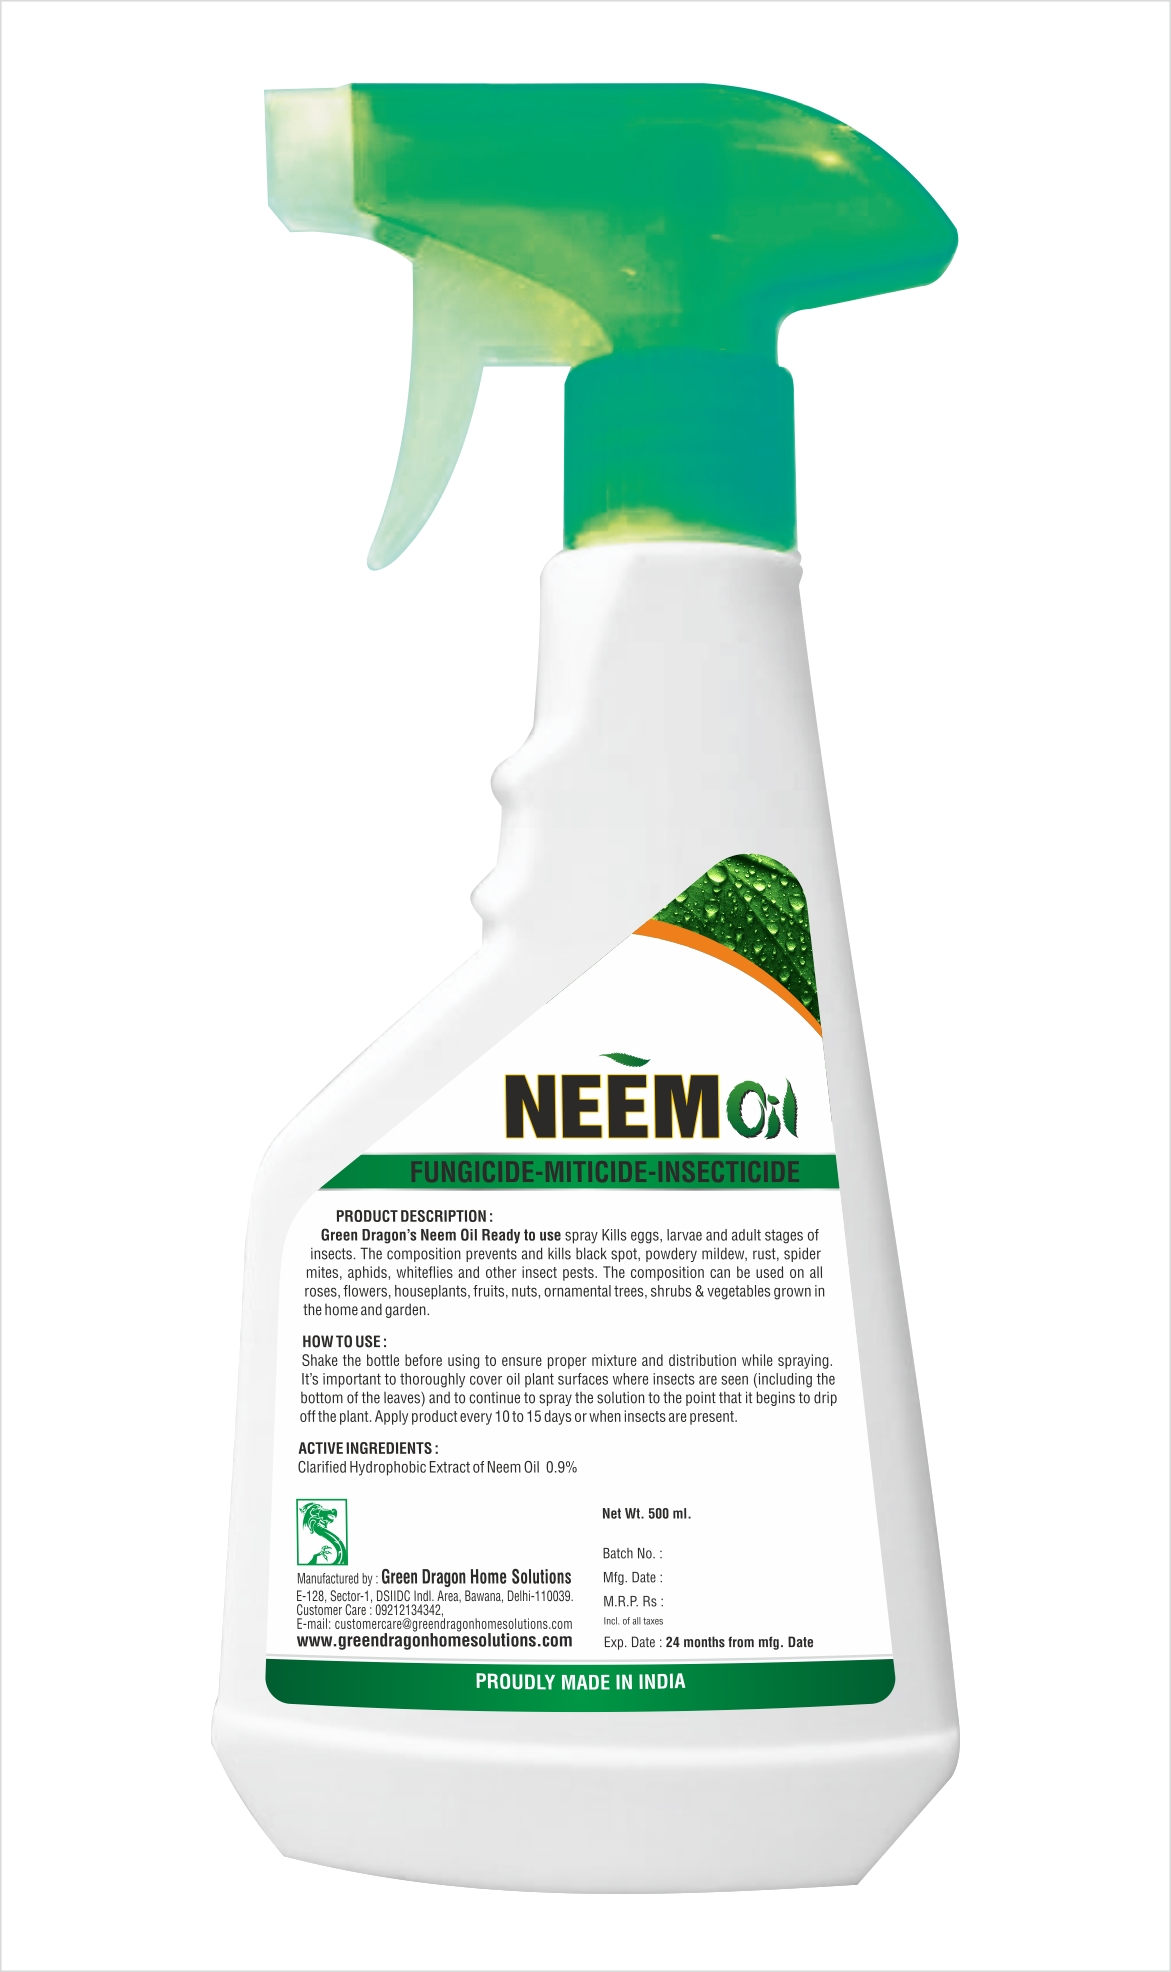 Buy Green Dragon's Neem Oil Insecticide Fungicide Miticide for Lawn ...